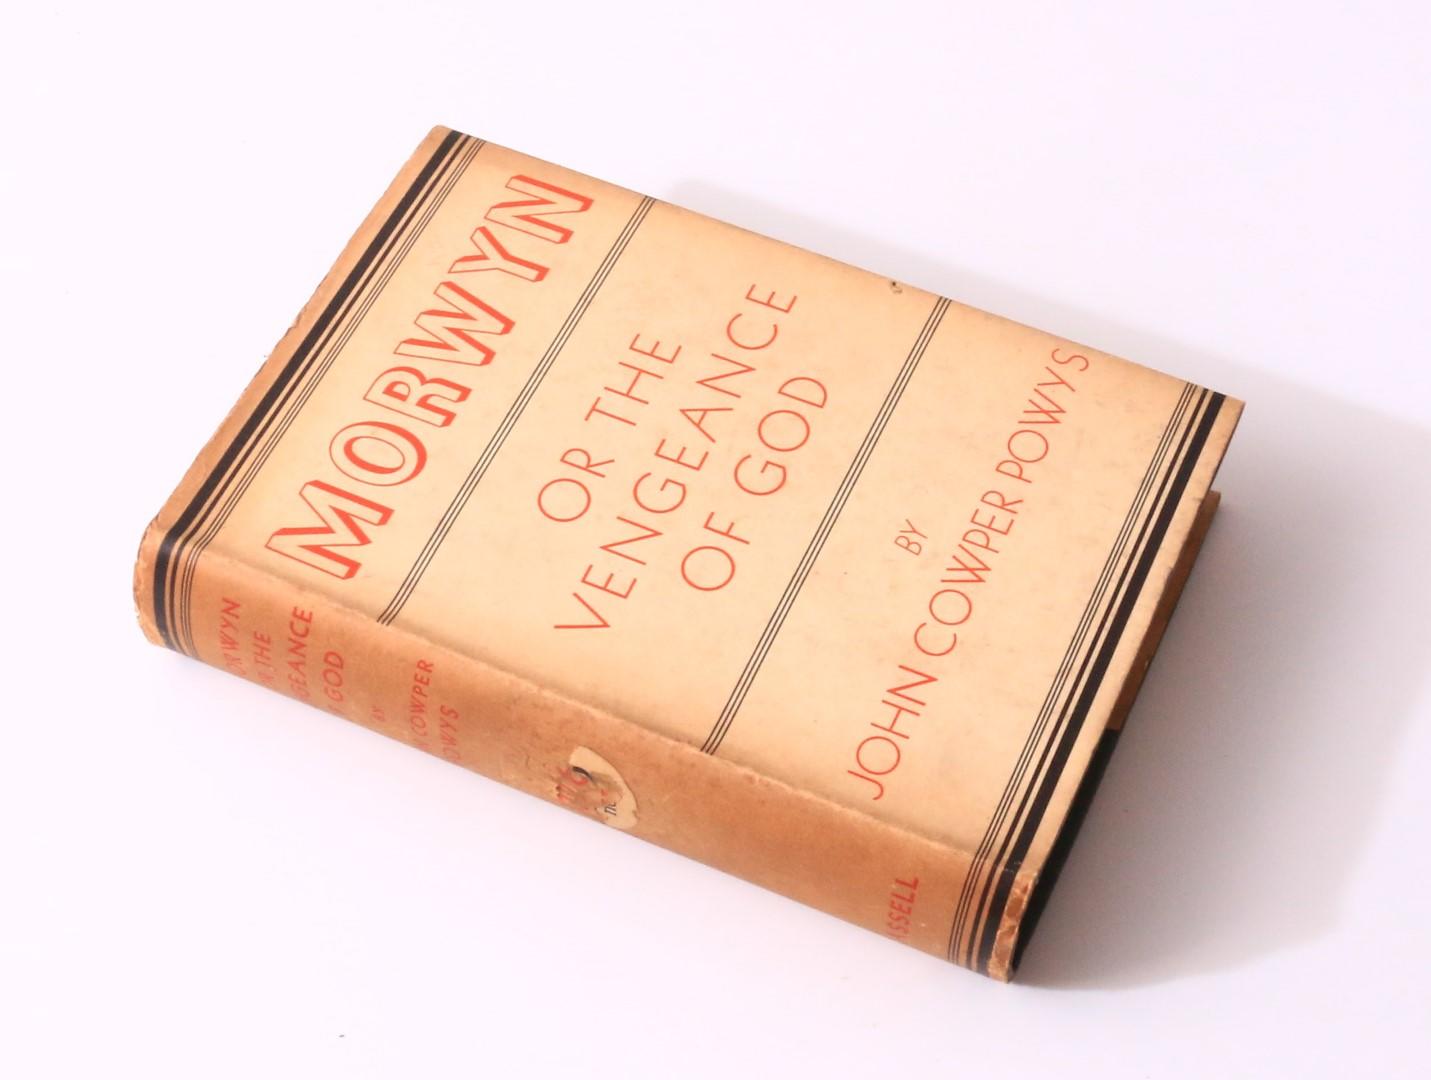 John Cowper Powys - Morwyn or the Vengeance of God - Cassell, 1937, First Edition.